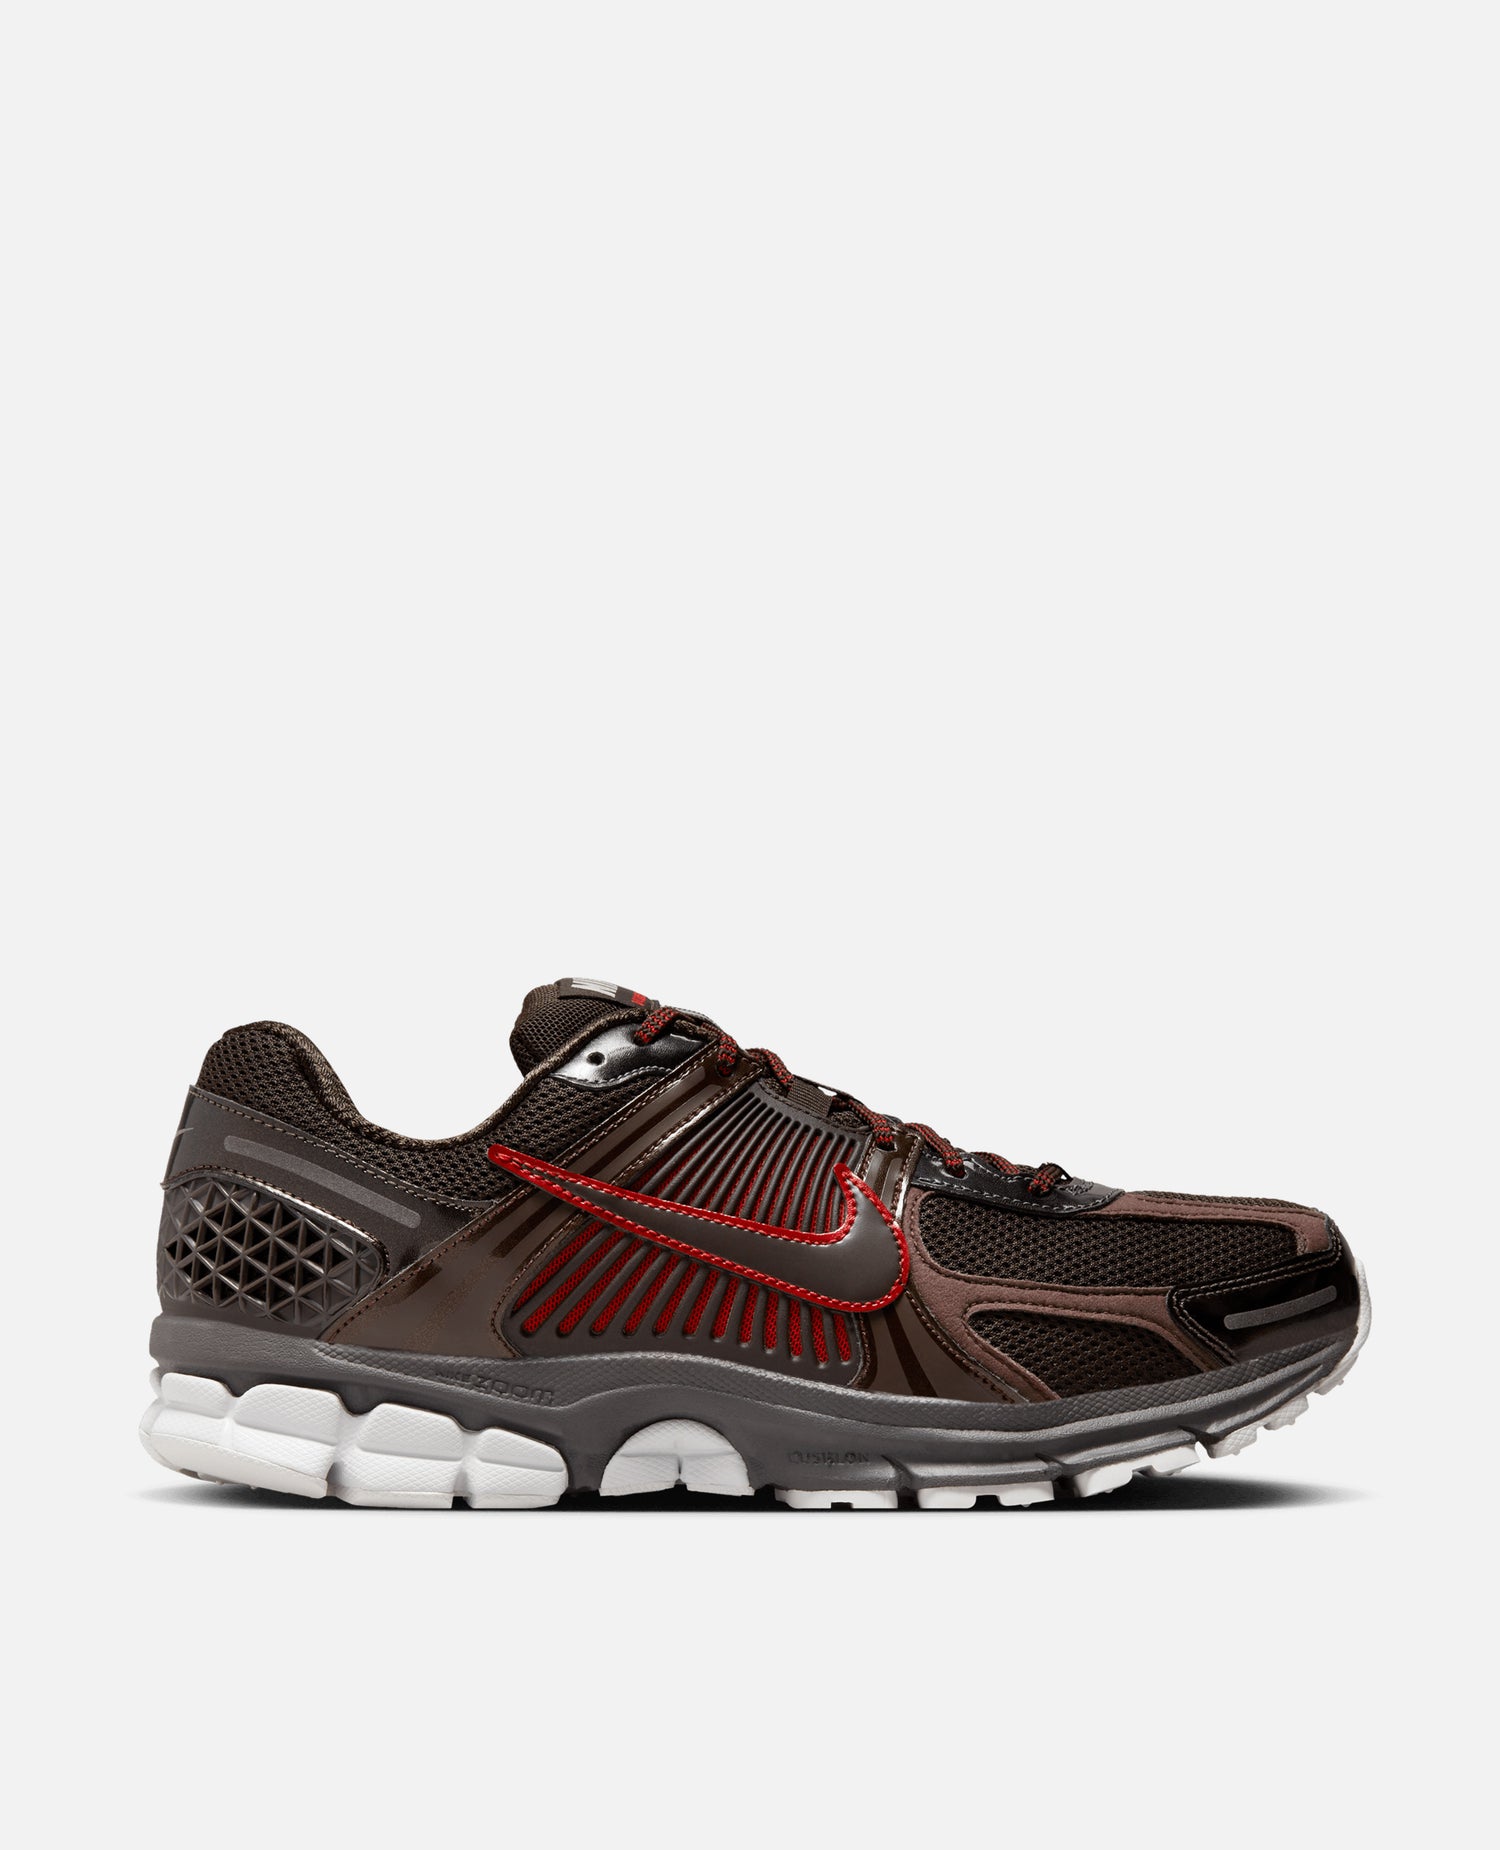 Nike Zoom Vomero 5 (Velvet Brown/Gym Red-Earth-Anthracite)